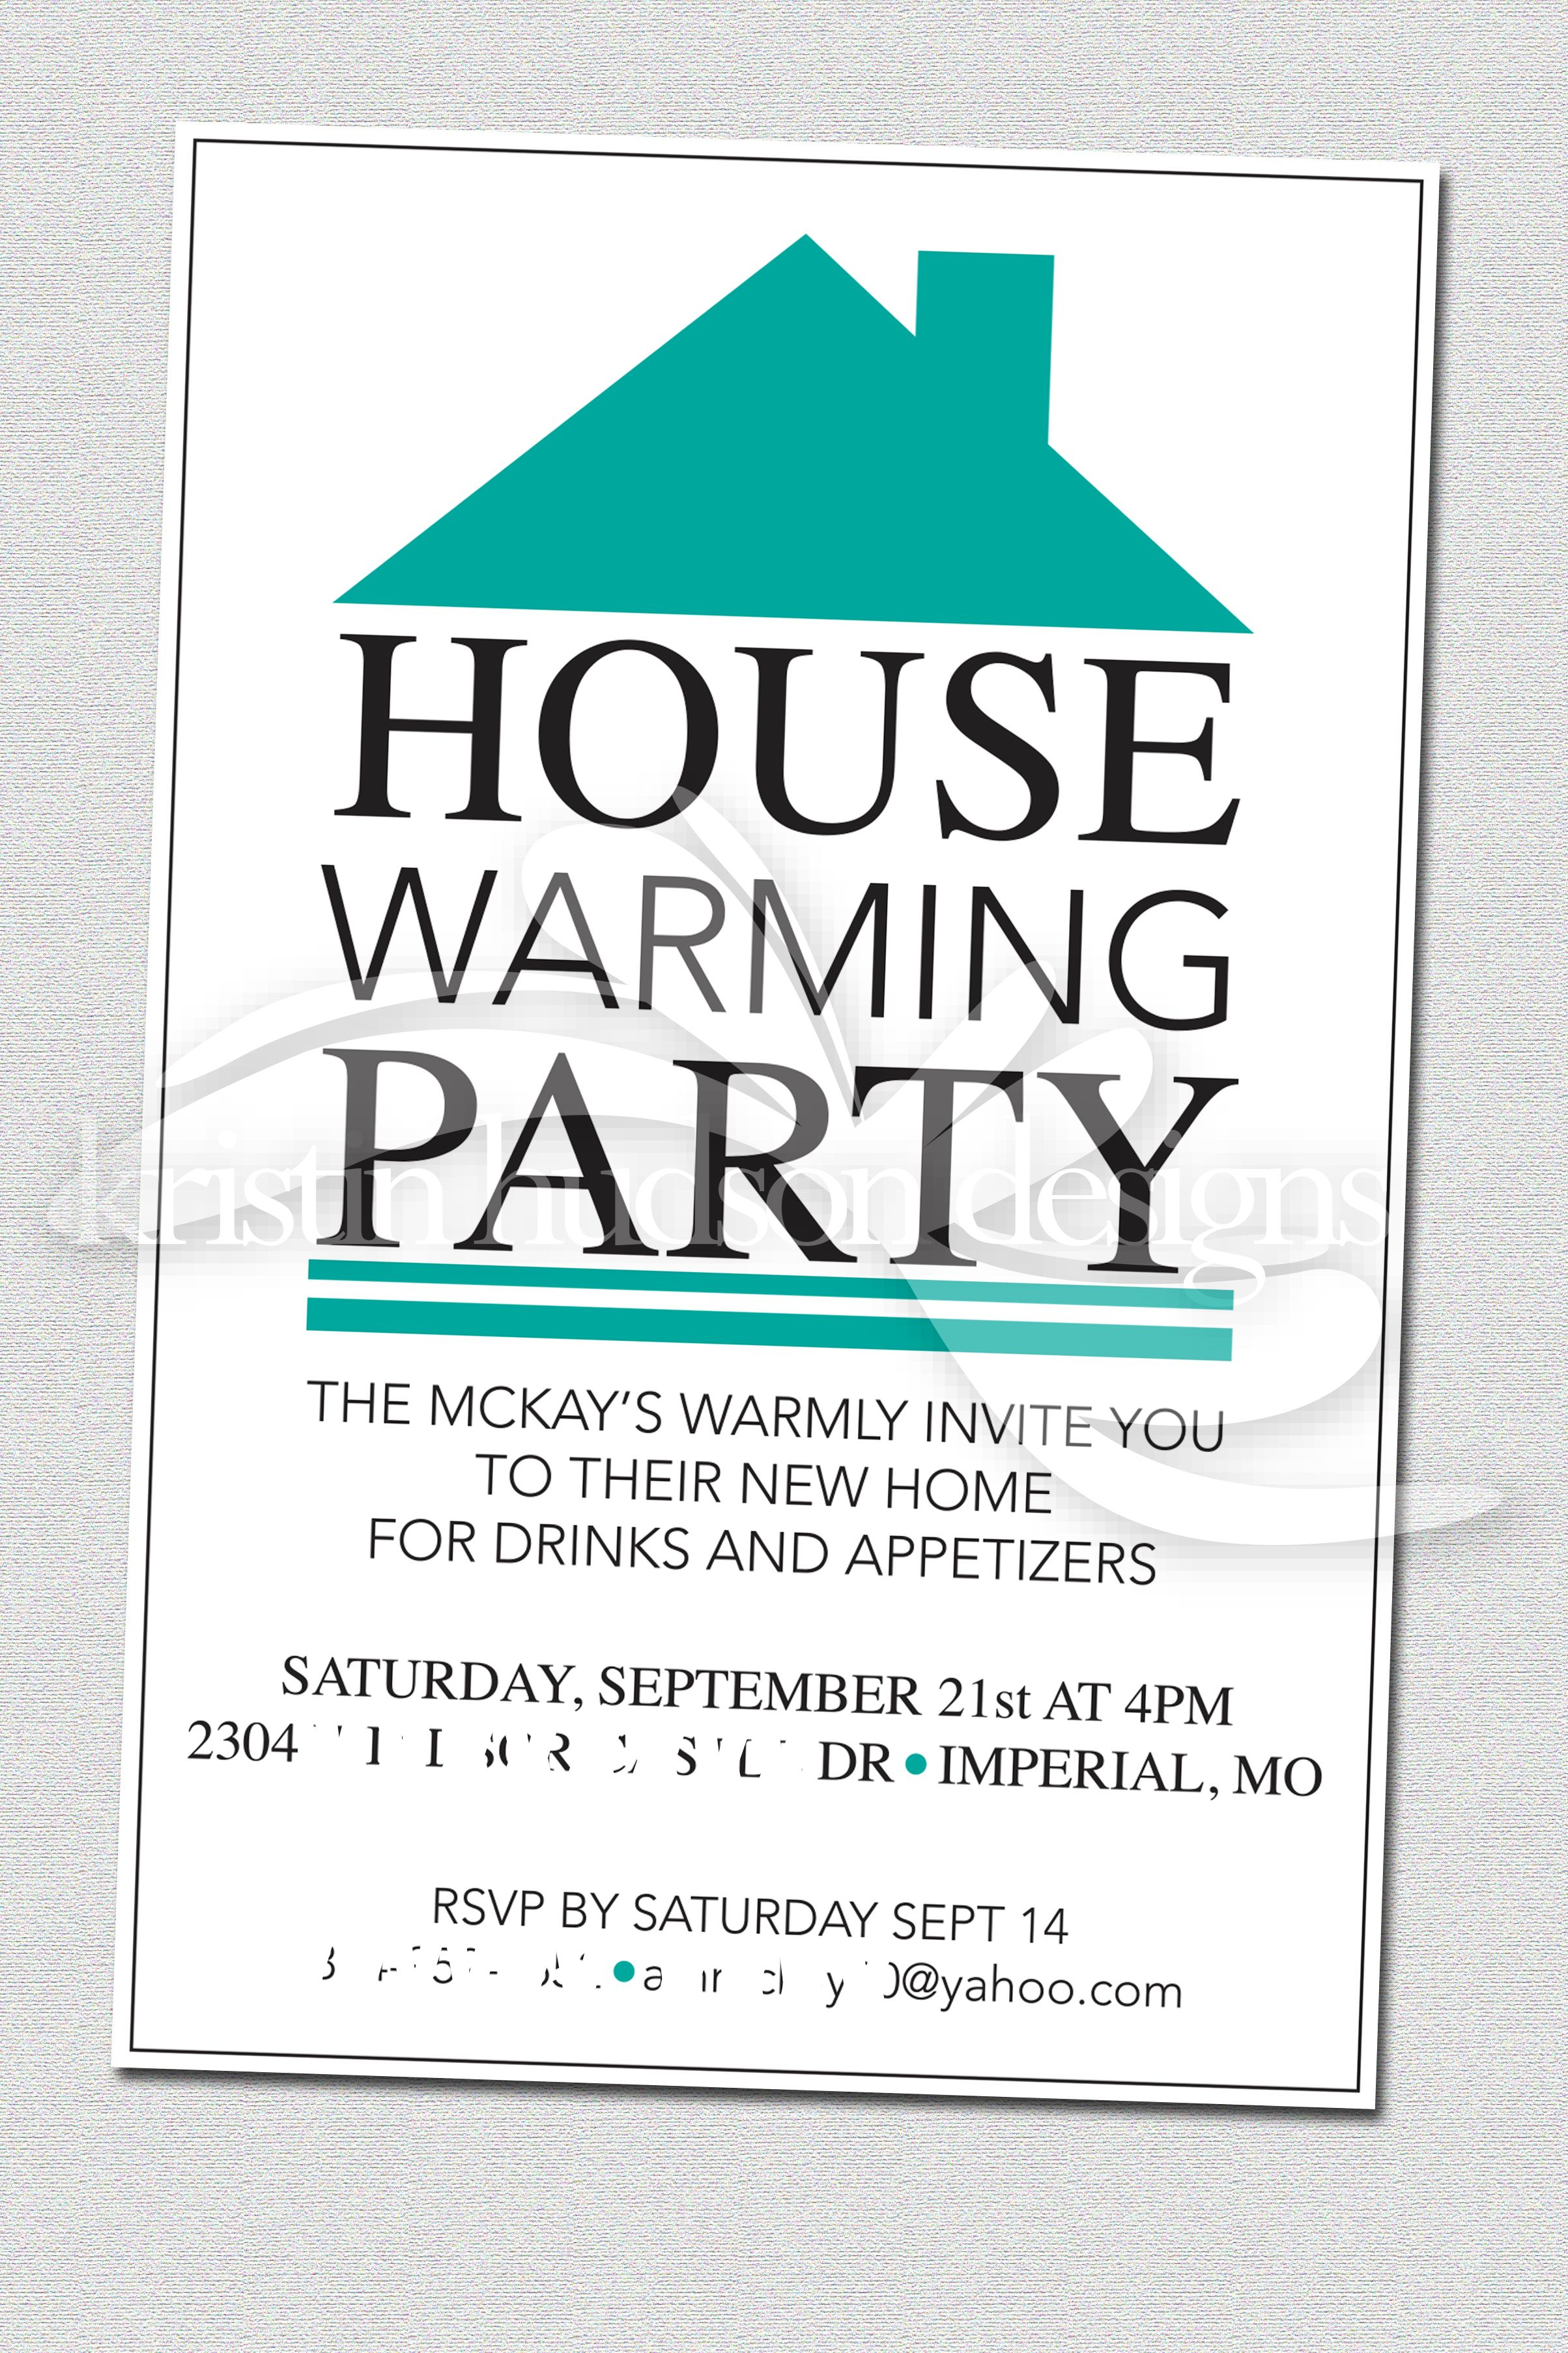 House Warming Party Invite Designs Kristin Hudson Invitations with regard to dimensions 2407 X 3611